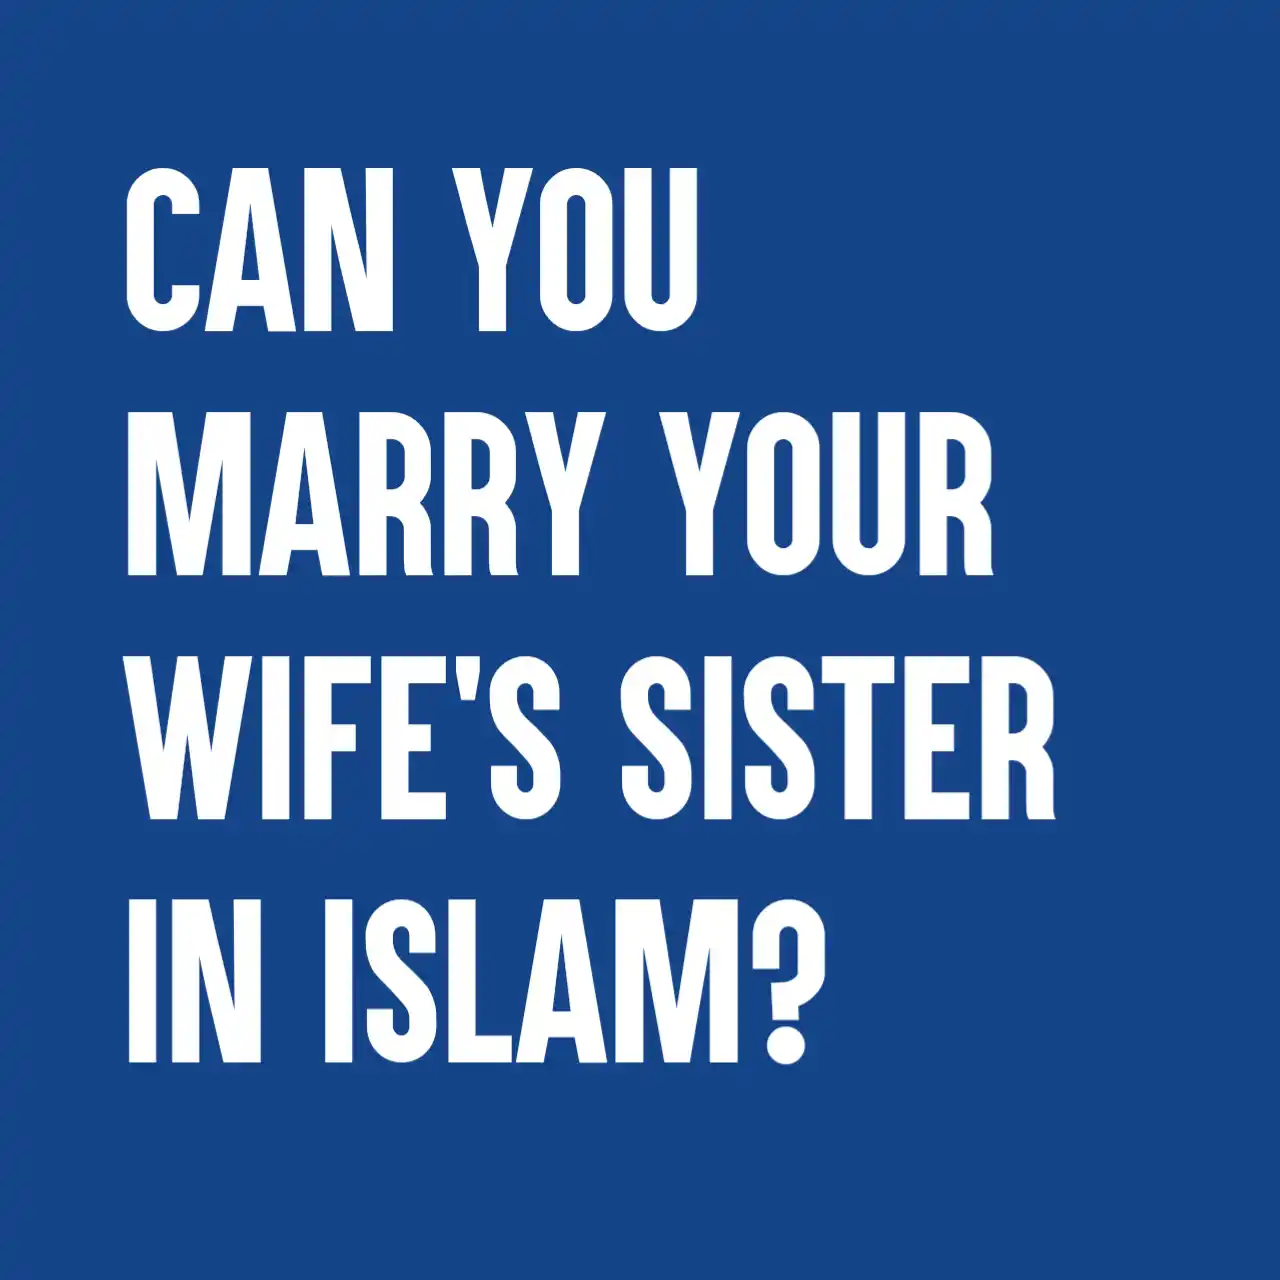 Can You Marry Your Wife's Sister in Islam?